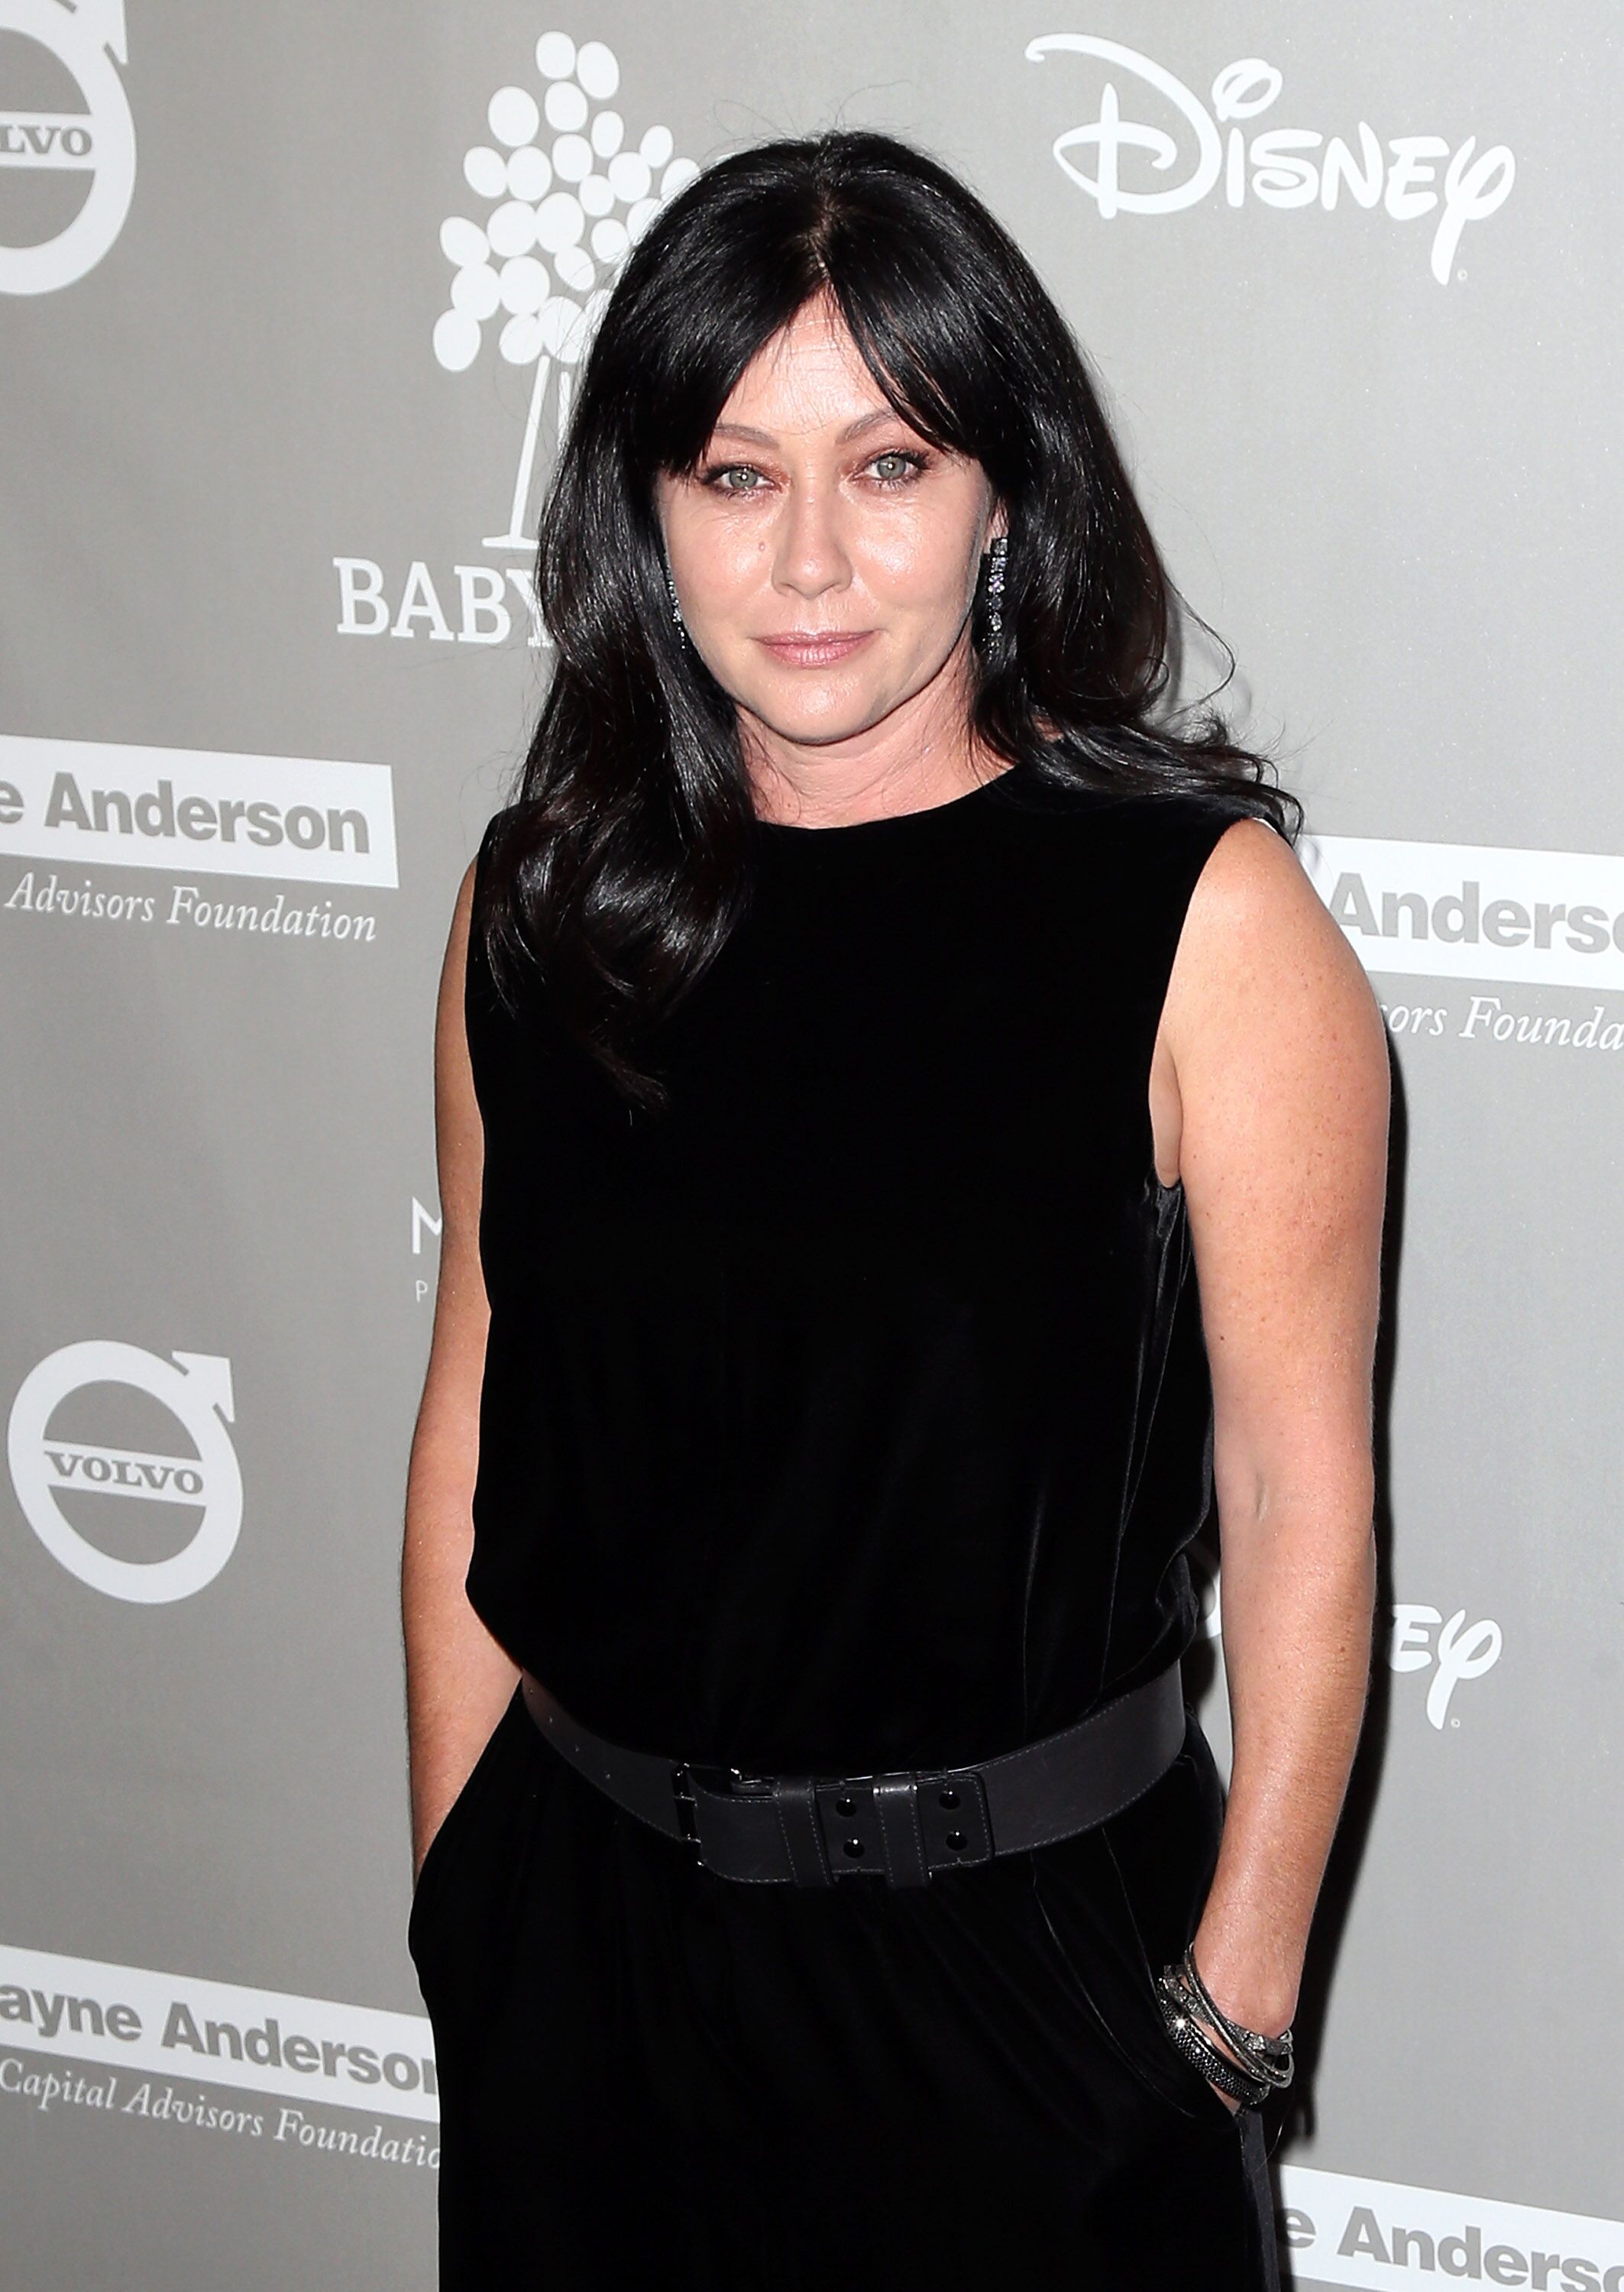 Shannen Doherty attends the 2015 Baby2Baby Gala presented by MarulaOil & Kayne Capital Advisors Foundation honoring Kerry Washington at 3LABS | Photo: Getty Images